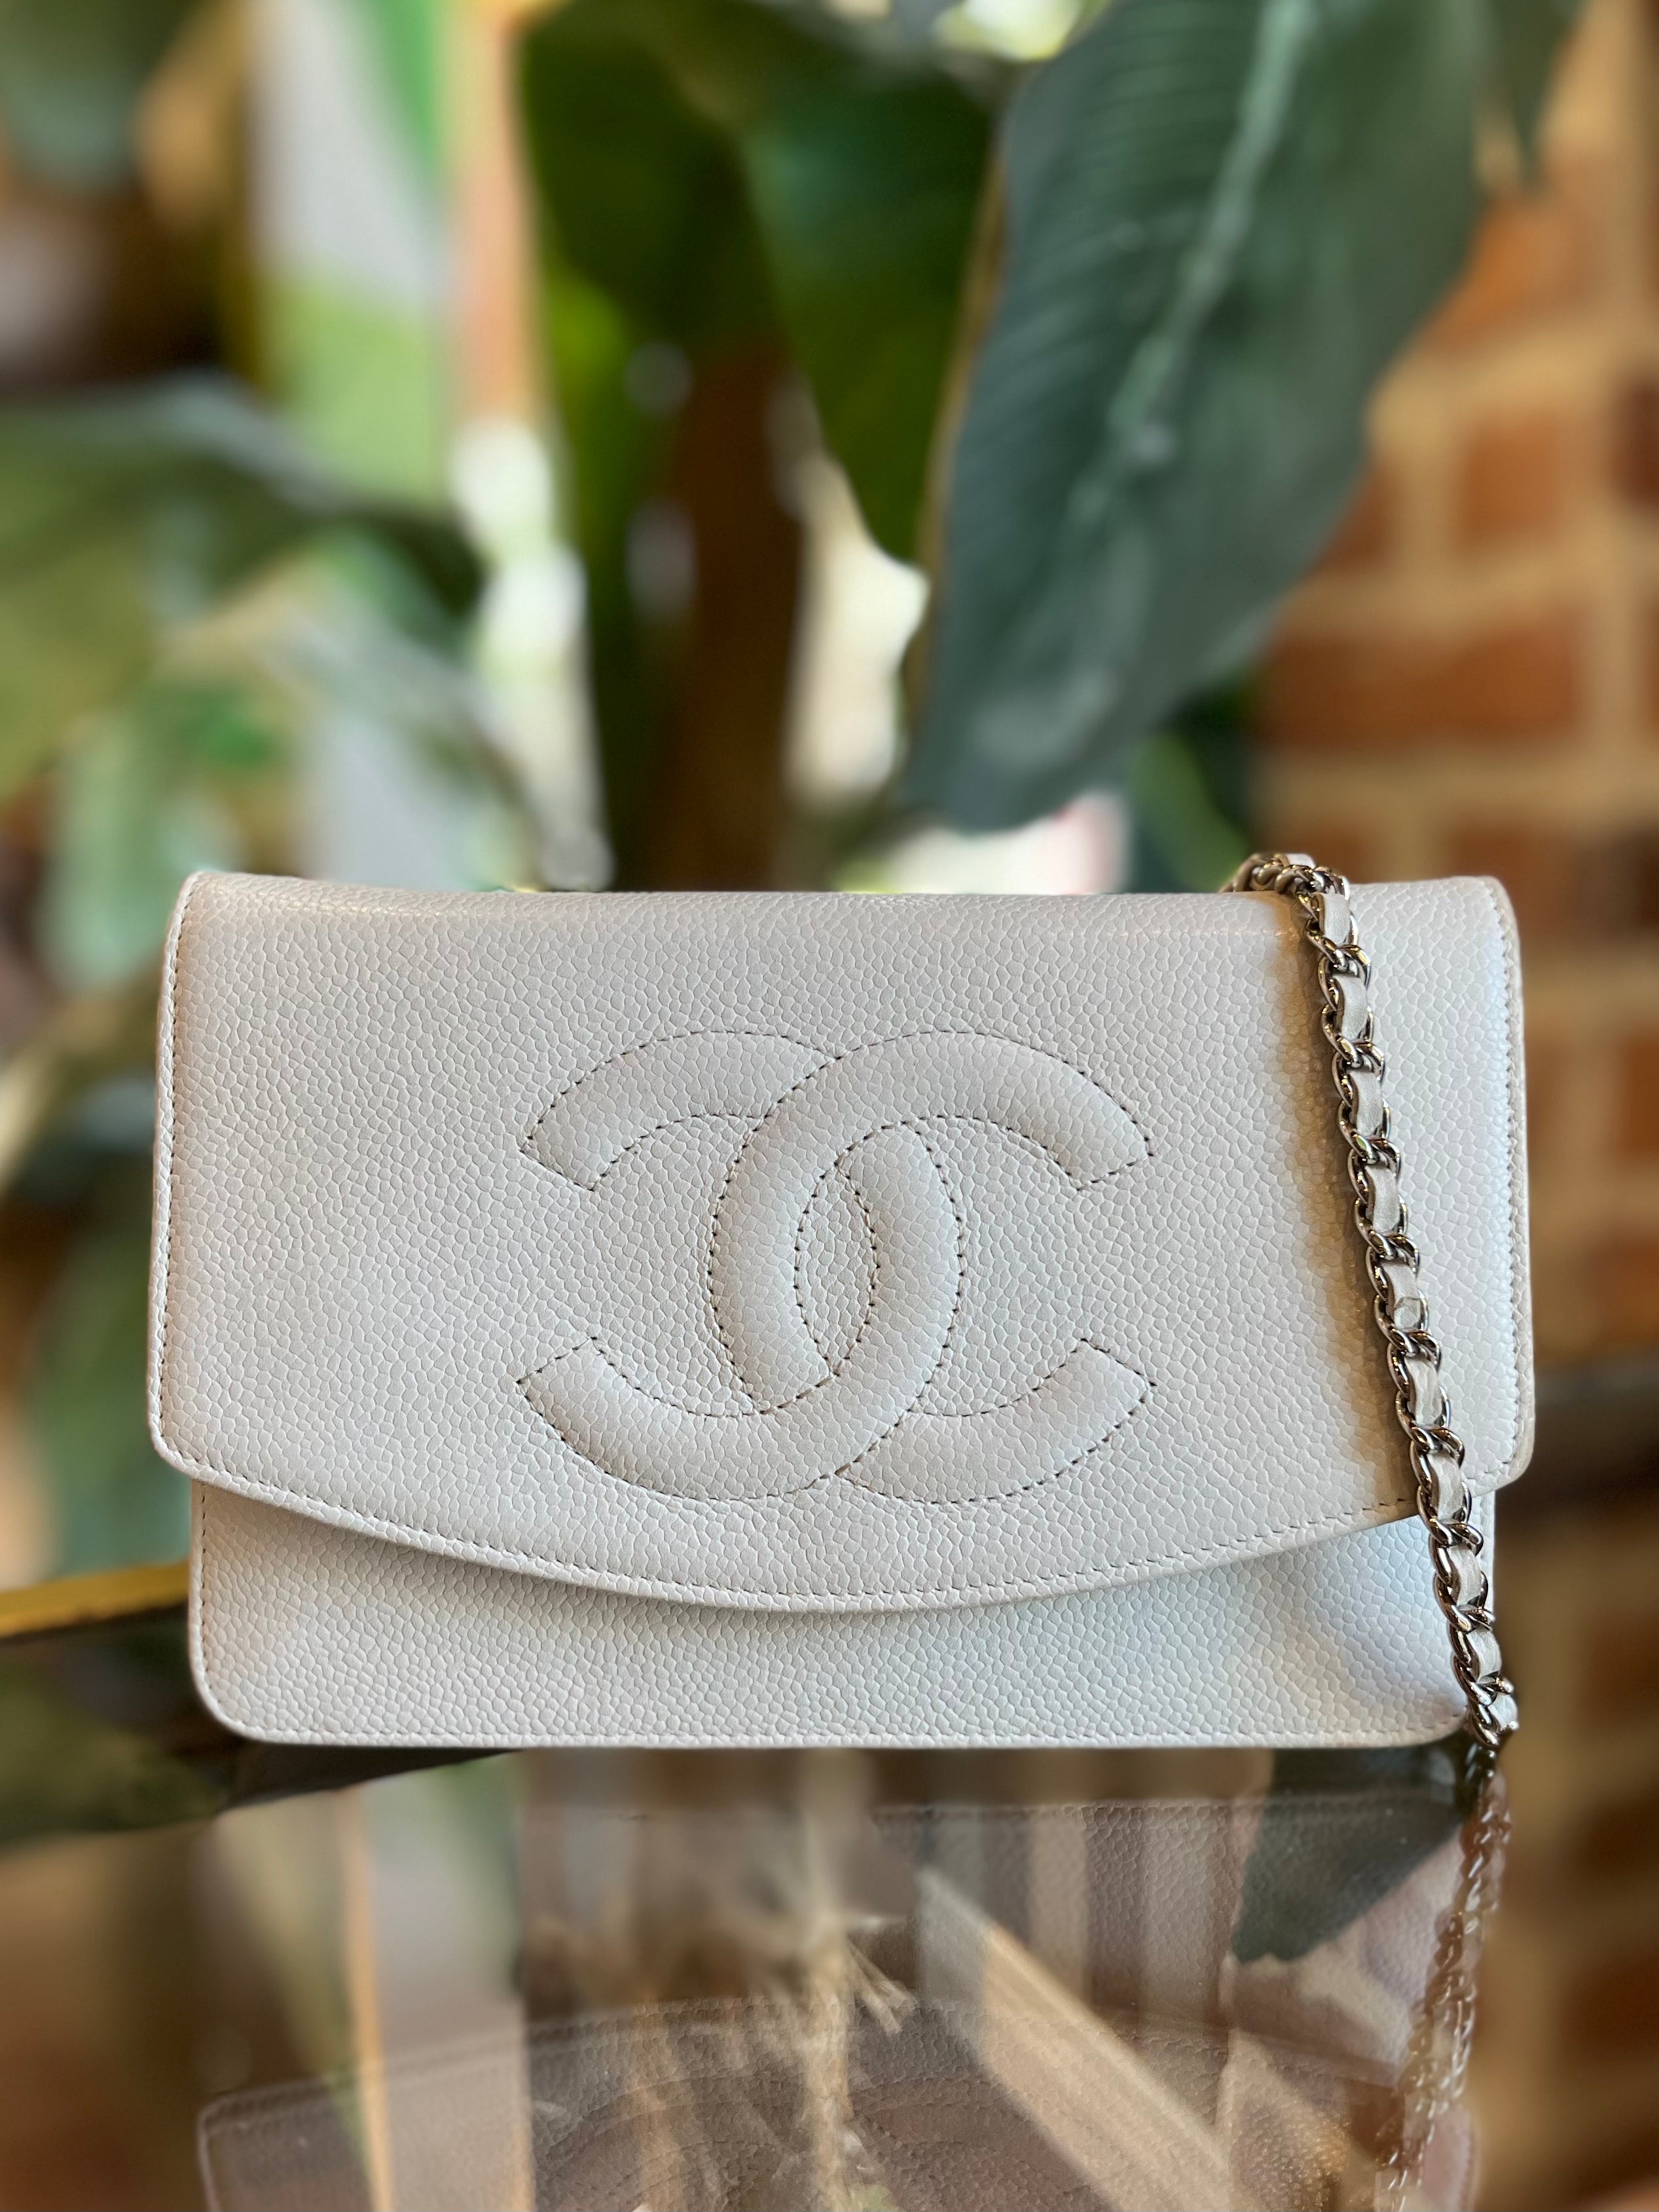 coco chanel mademoiselle at macy's